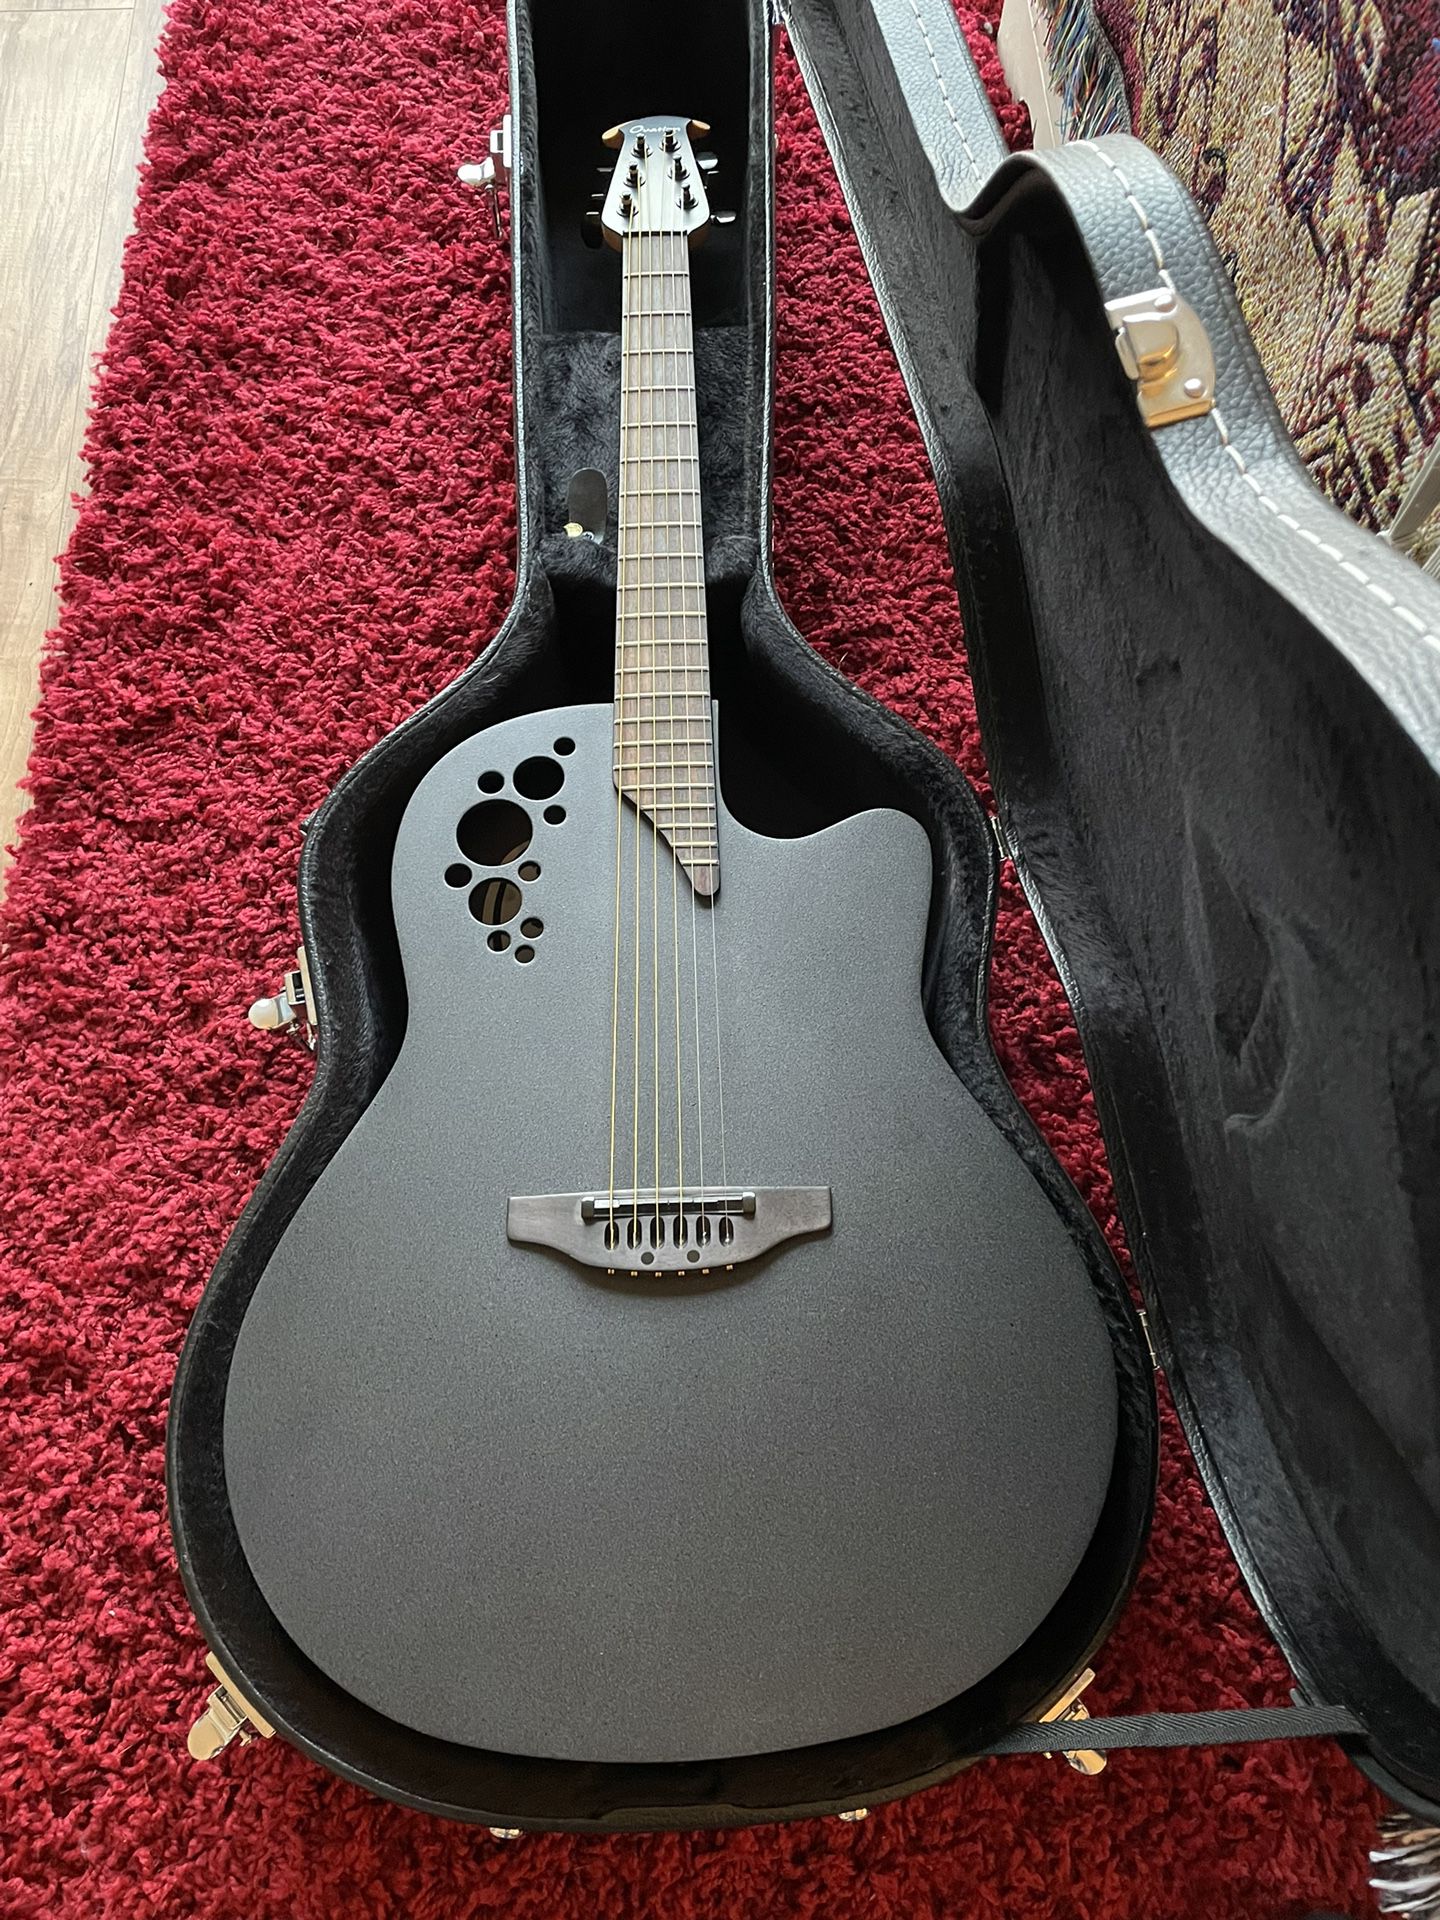 Ovation Mod TX Collection Acoustic-Electric Guitar, Textured Black, Super Shallow Body (1868TX-5)